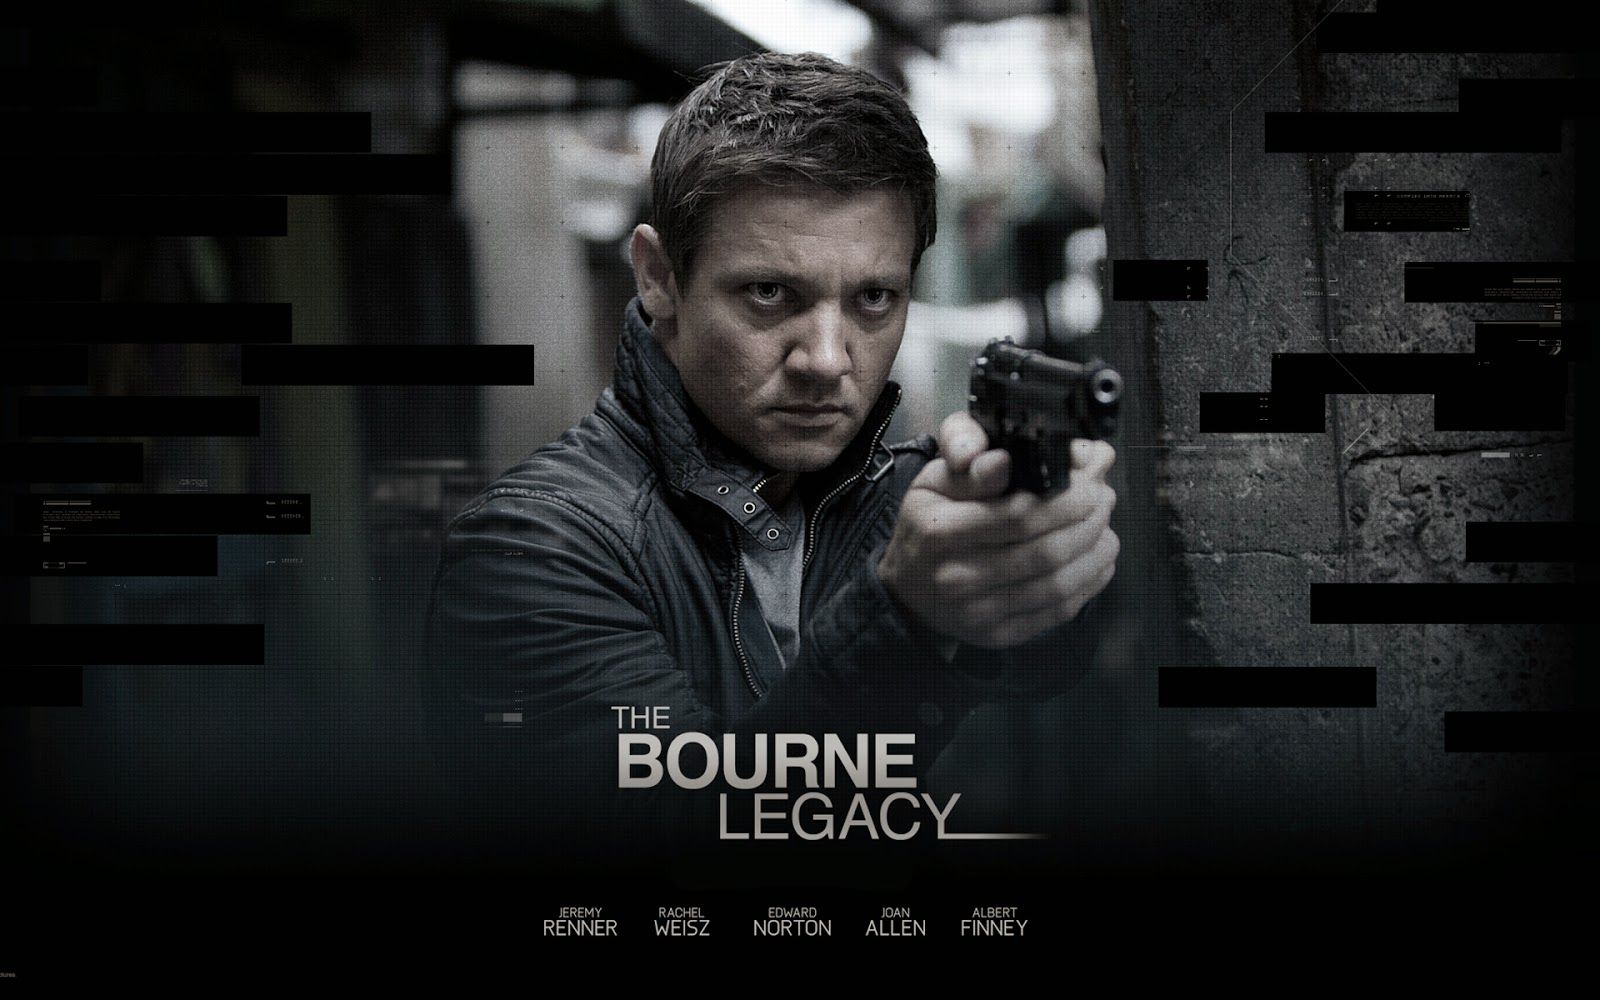 Download Reviews The Bourne Legacy. Bourne legacy, Bourne movies, Jeremy renner